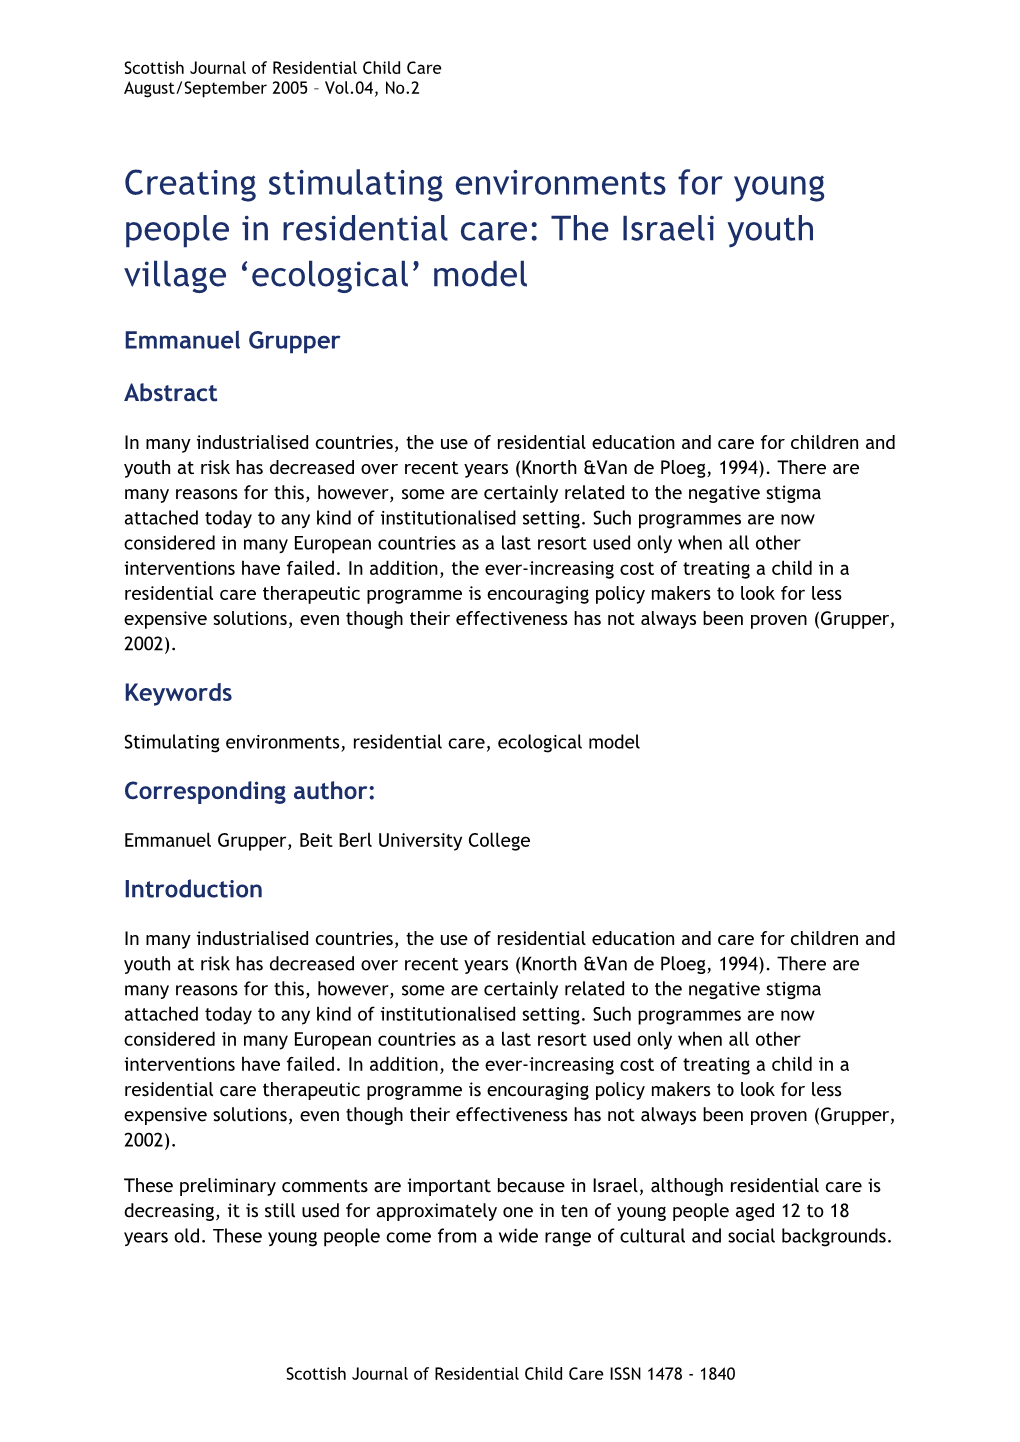 Creating Stimulating Environments for Young People in Residential Care: the Israeli Youth Village ‘Ecological’ Model